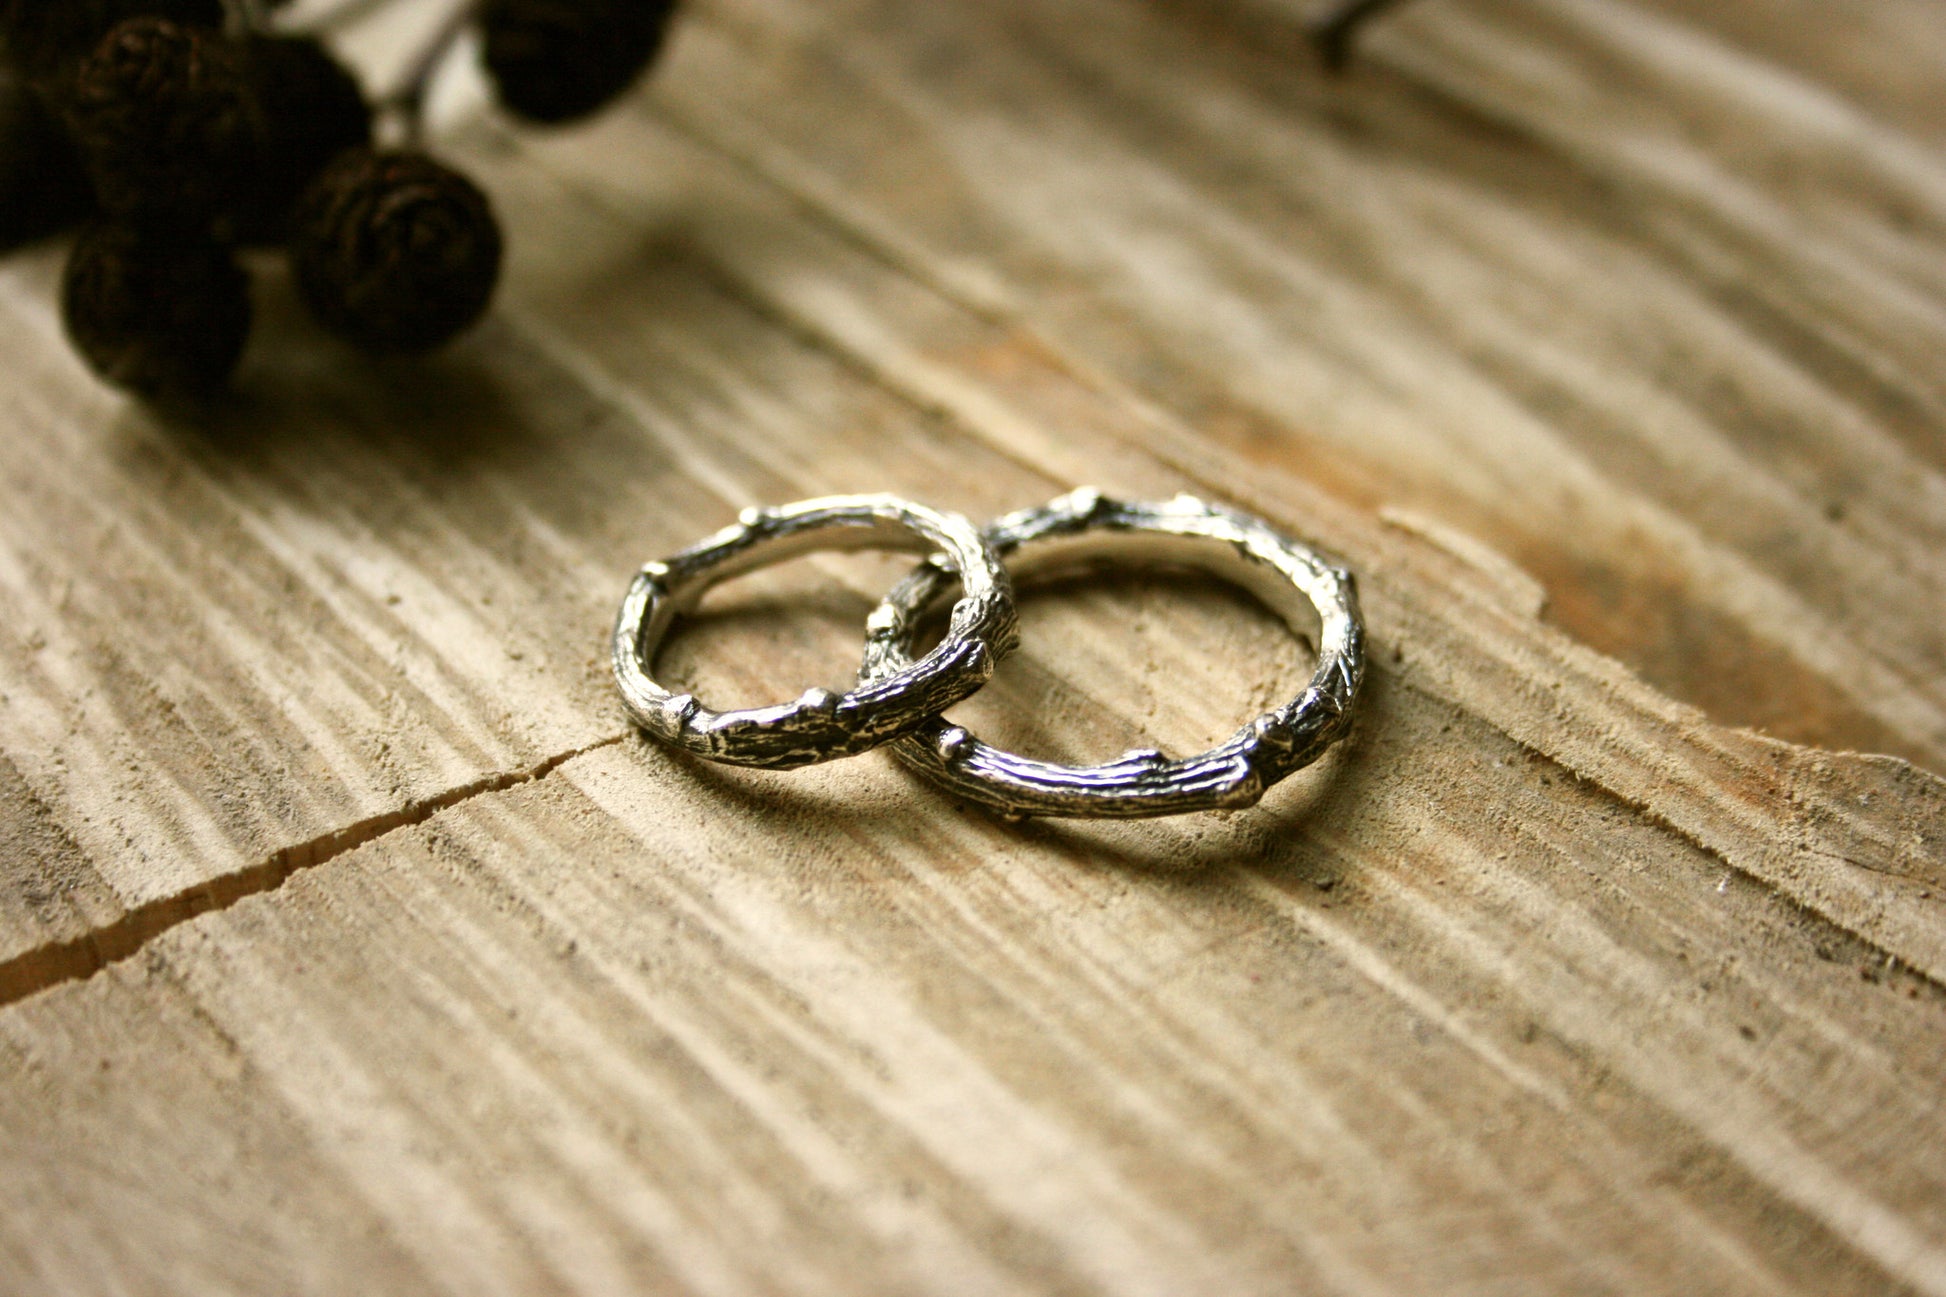 Silver Twig Wedding Rings - Curious Magpie Jewellery - 5